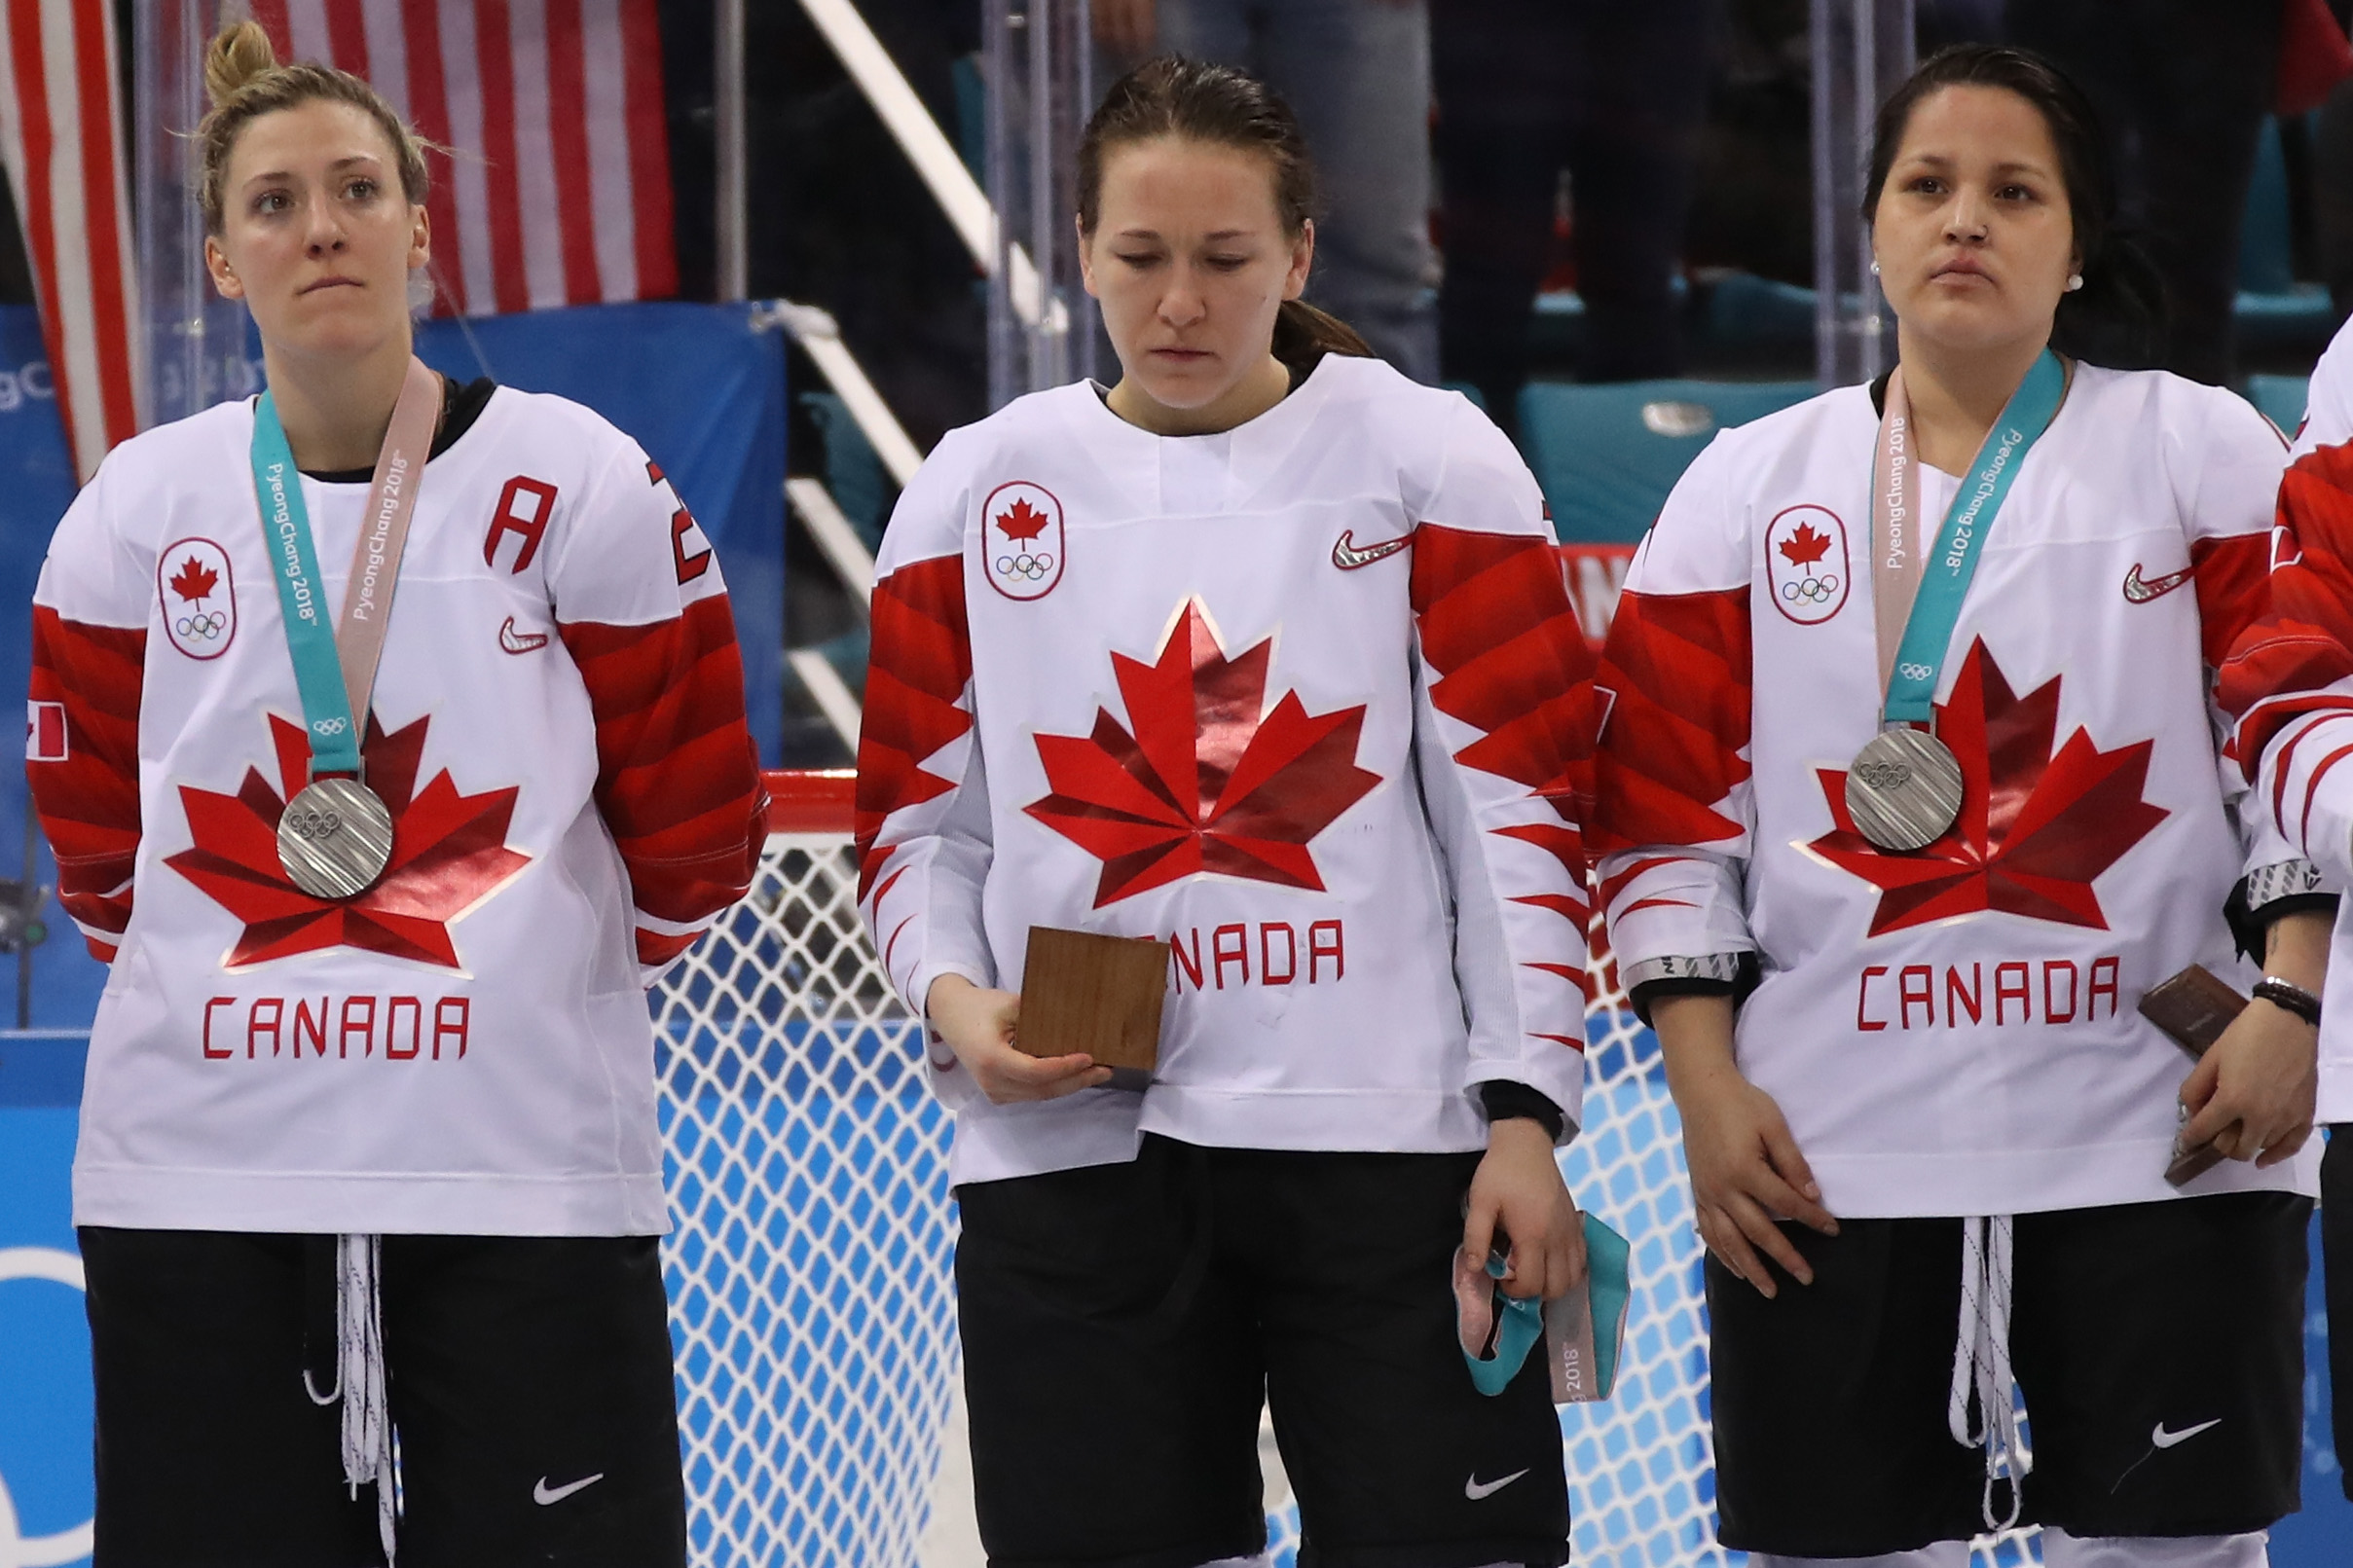 Jocelyne Larocque #3 of Canada refuses to wear her silver medal after losing to the United States in the Women's Gold Medal Game on day thirteen of the PyeongChang 2018 Winter Olympic Games at Gangneung Hockey Centre on February 22, 2018 in Gangneung, South Korea.  (Photo by Bruce Bennett/Getty Images) (Bruce Bennett&mdash;Getty Images)